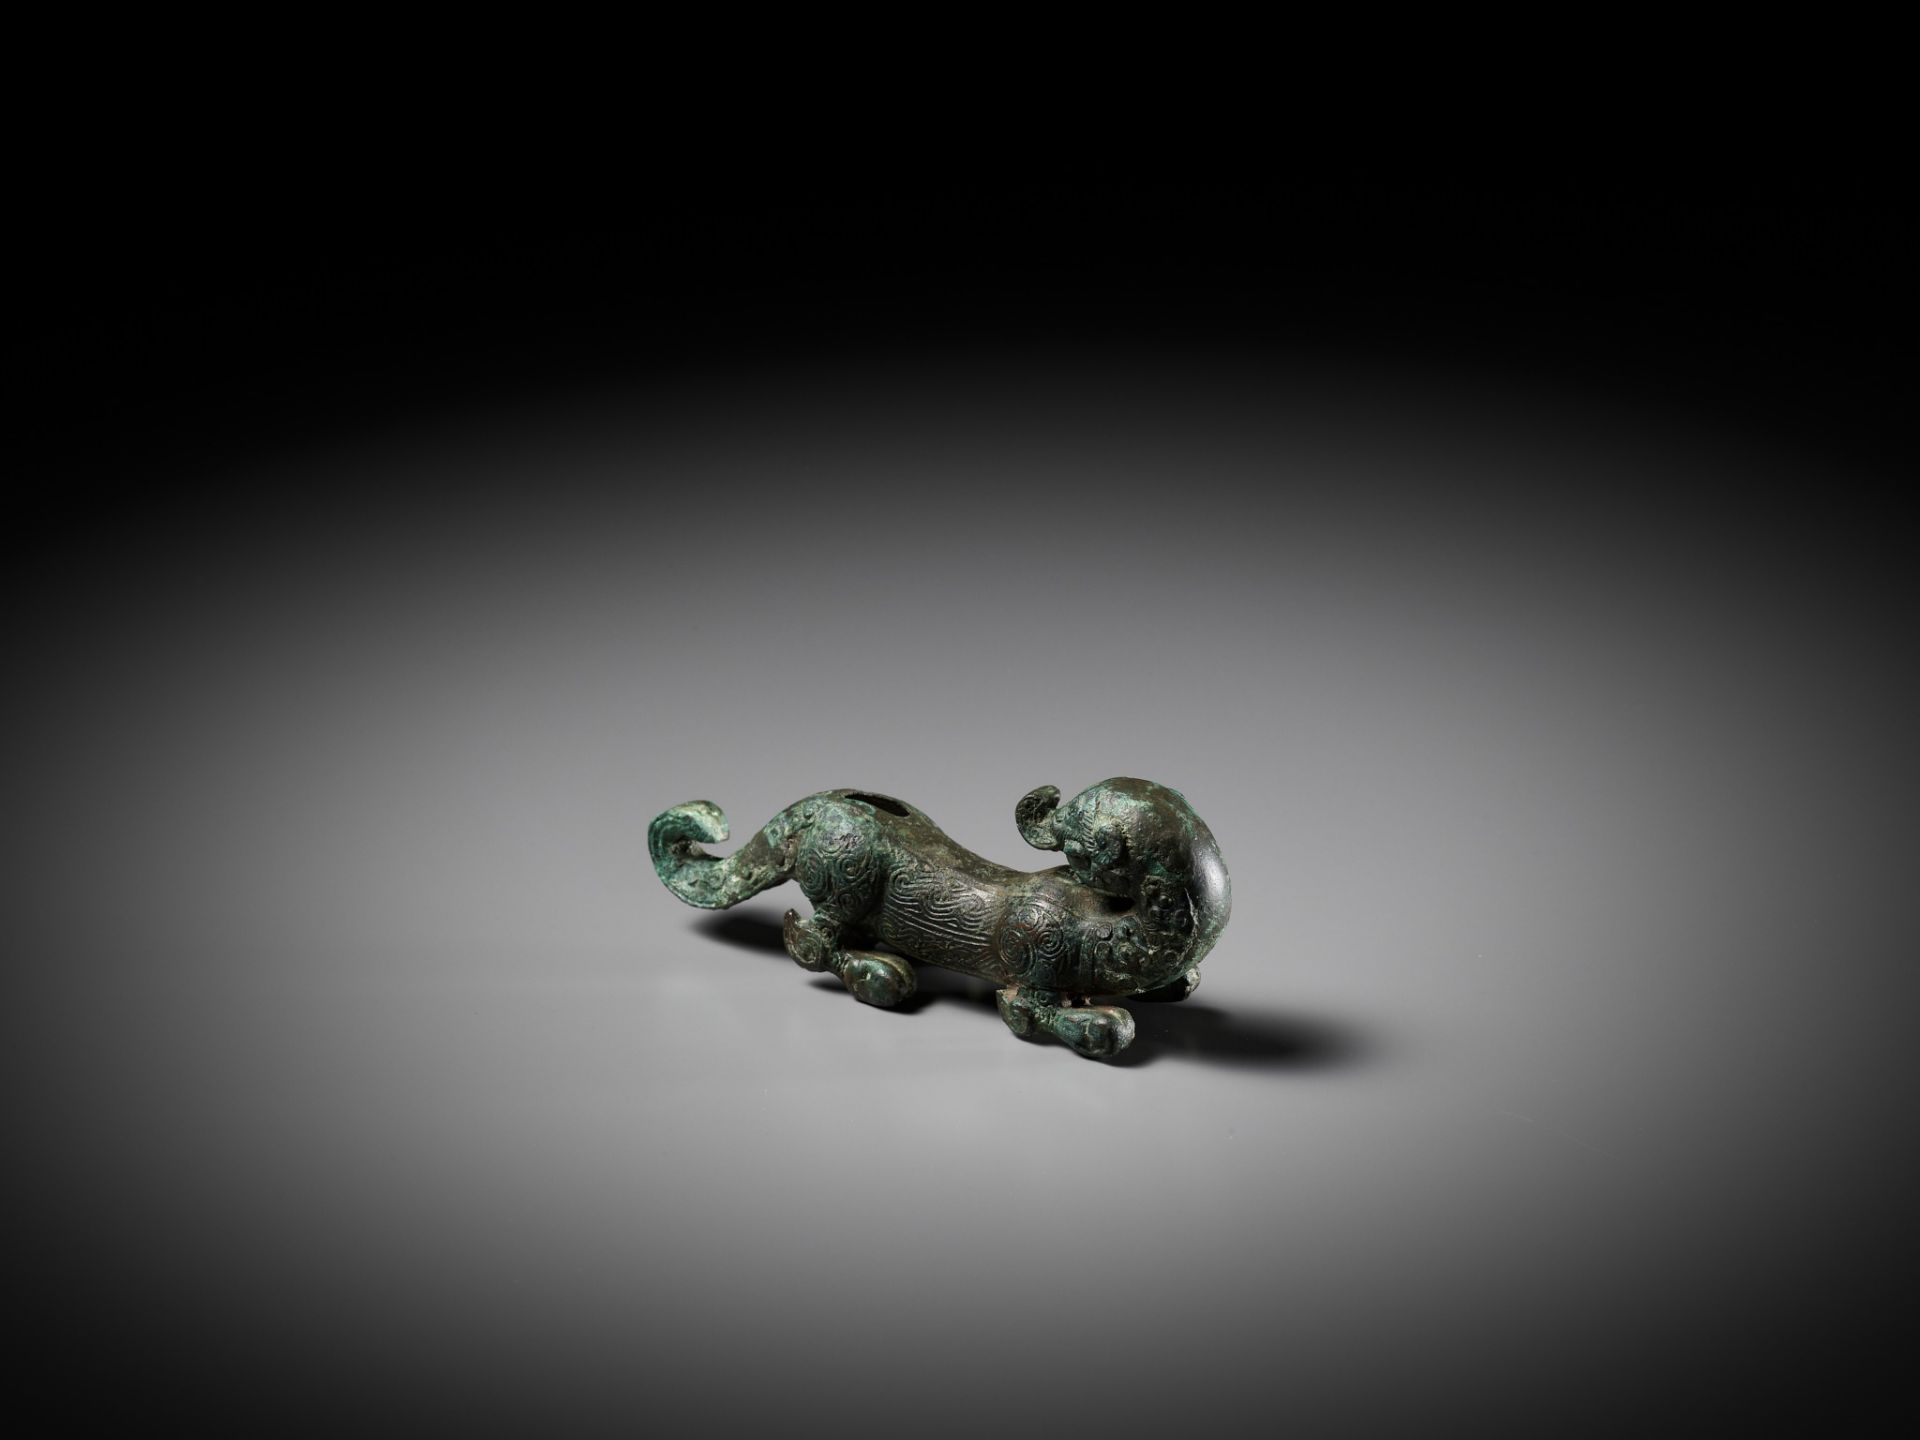 A SUPERB BRONZE FIGURE OF A DRAGON, EASTERN ZHOU DYNASTY, CHINA, 770-256 BC - Image 11 of 23